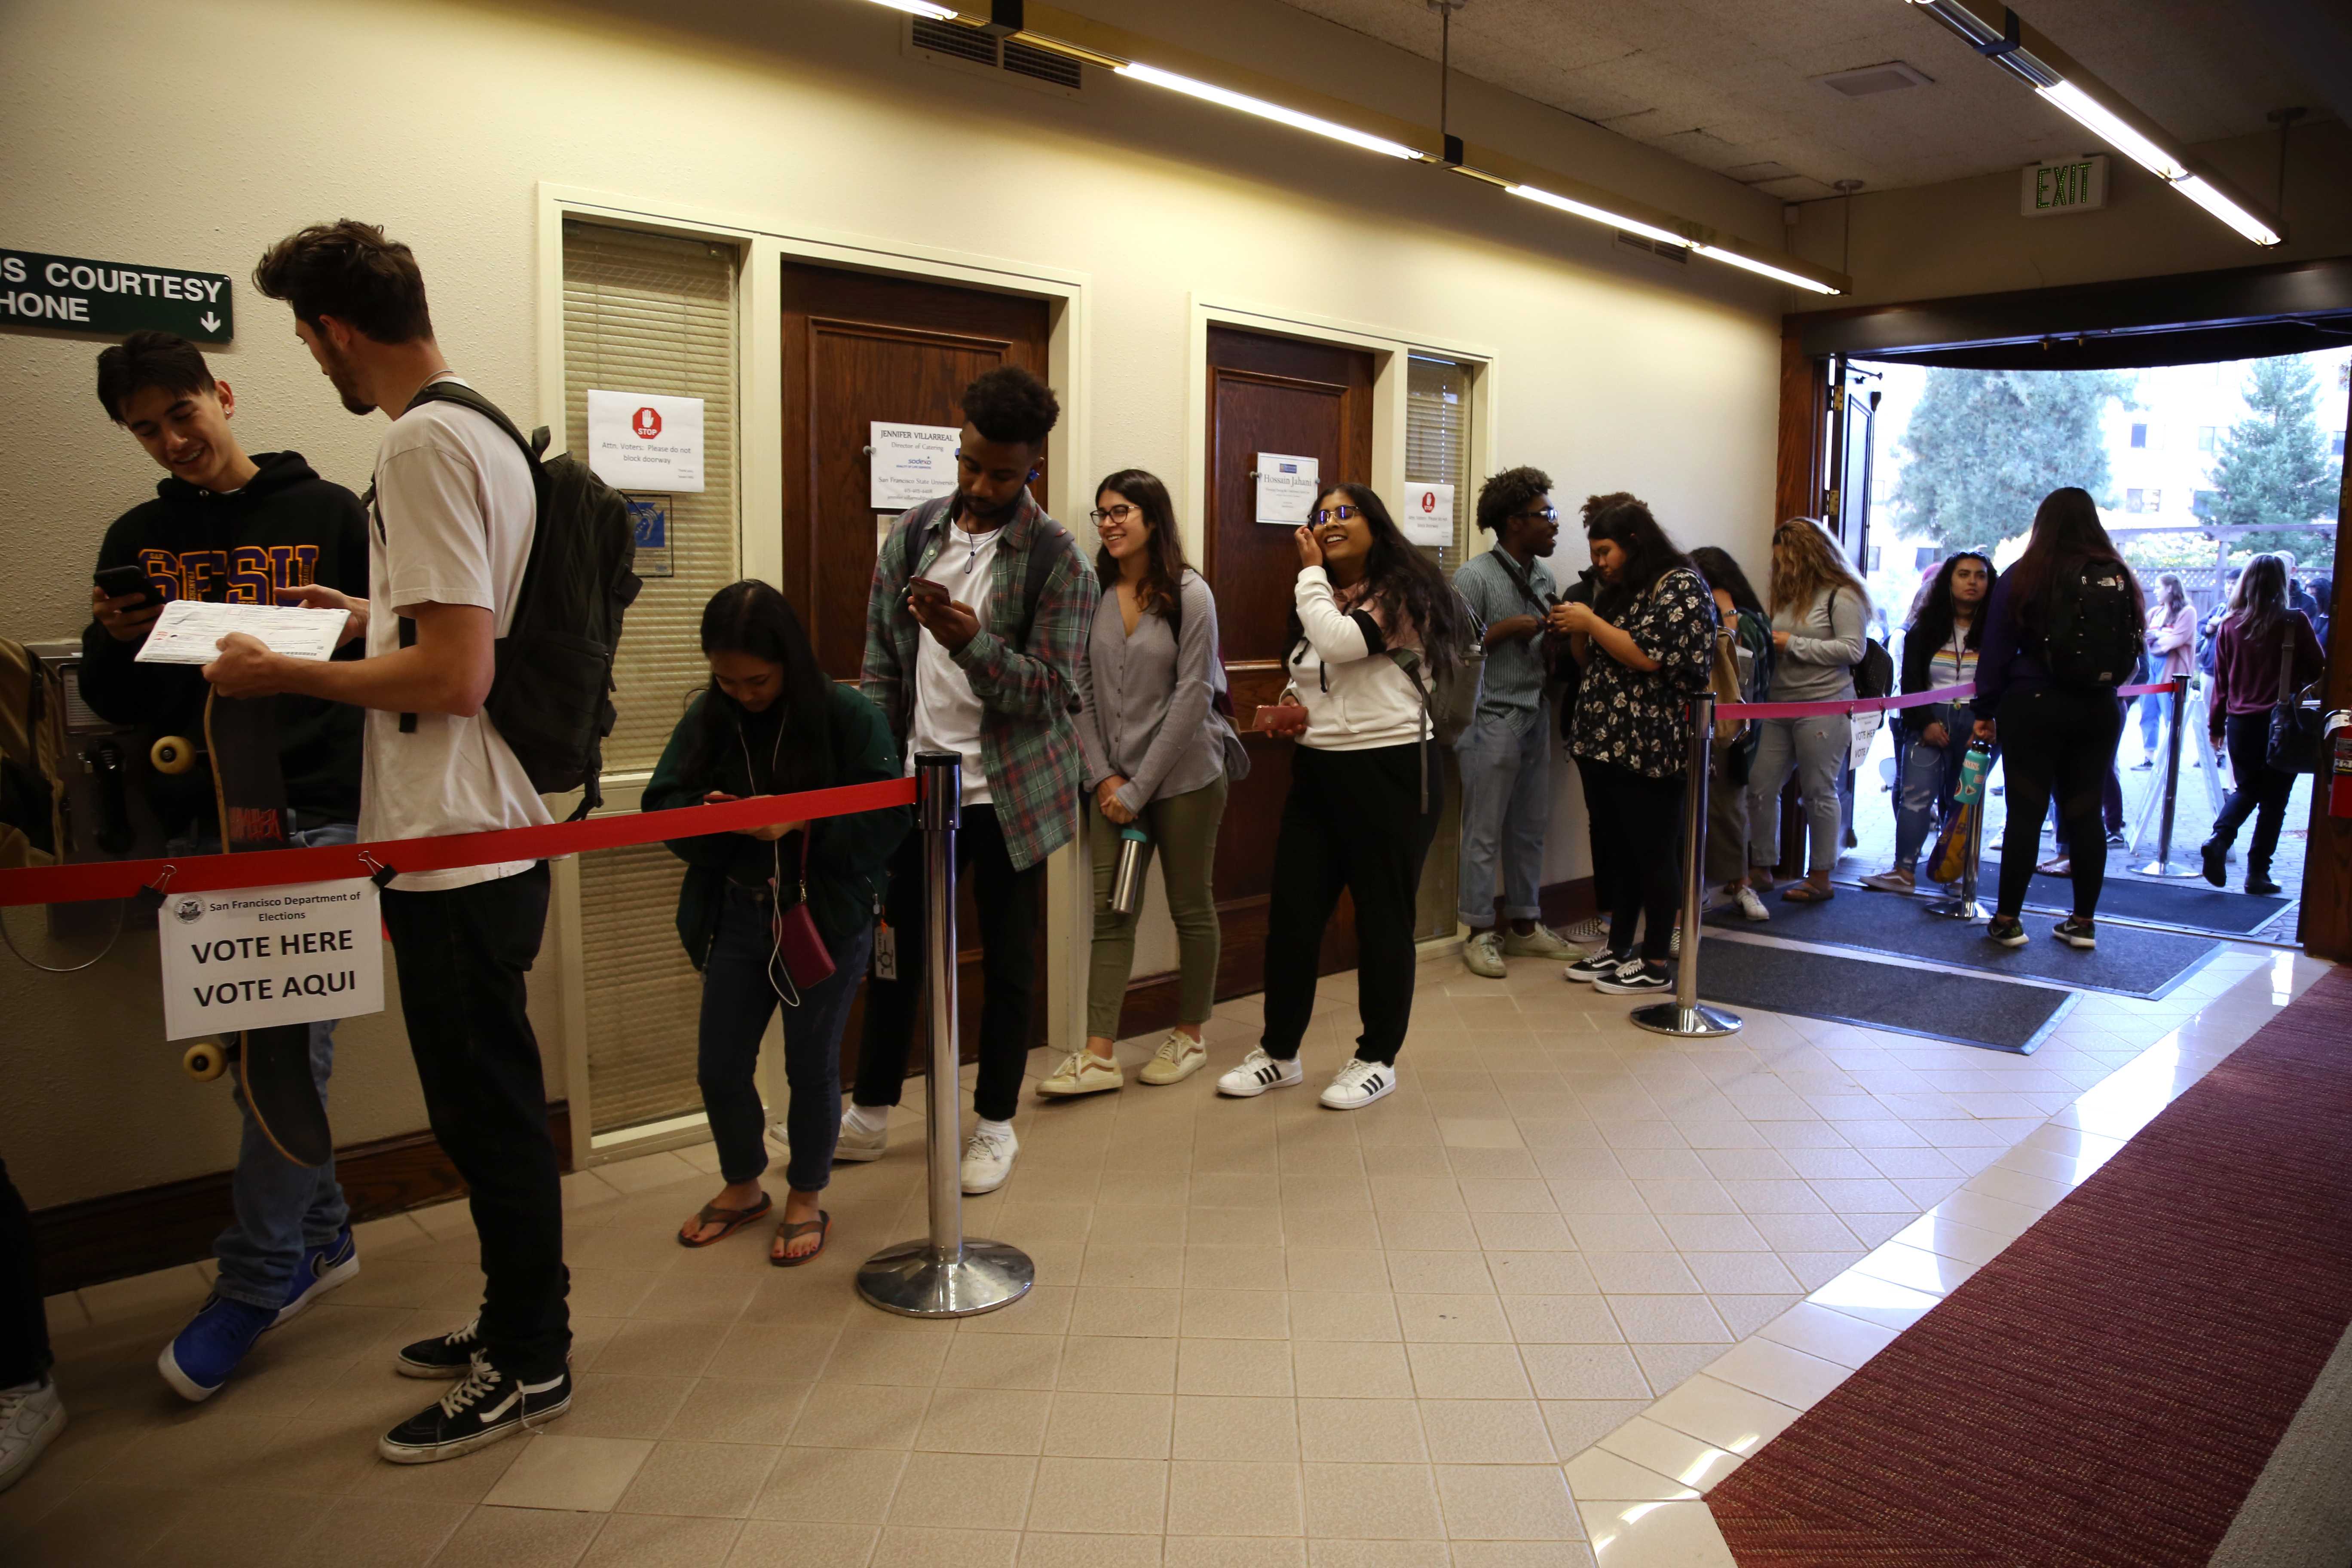 People wait in line at SF States Seven Hills Conference Center to cast their votes in the Midterm Elections on Tuesday, Nov. 6, 2018. Some students waited in lines for three hours to cast their votes. (Mira Laing/Golden Gate Xpress)